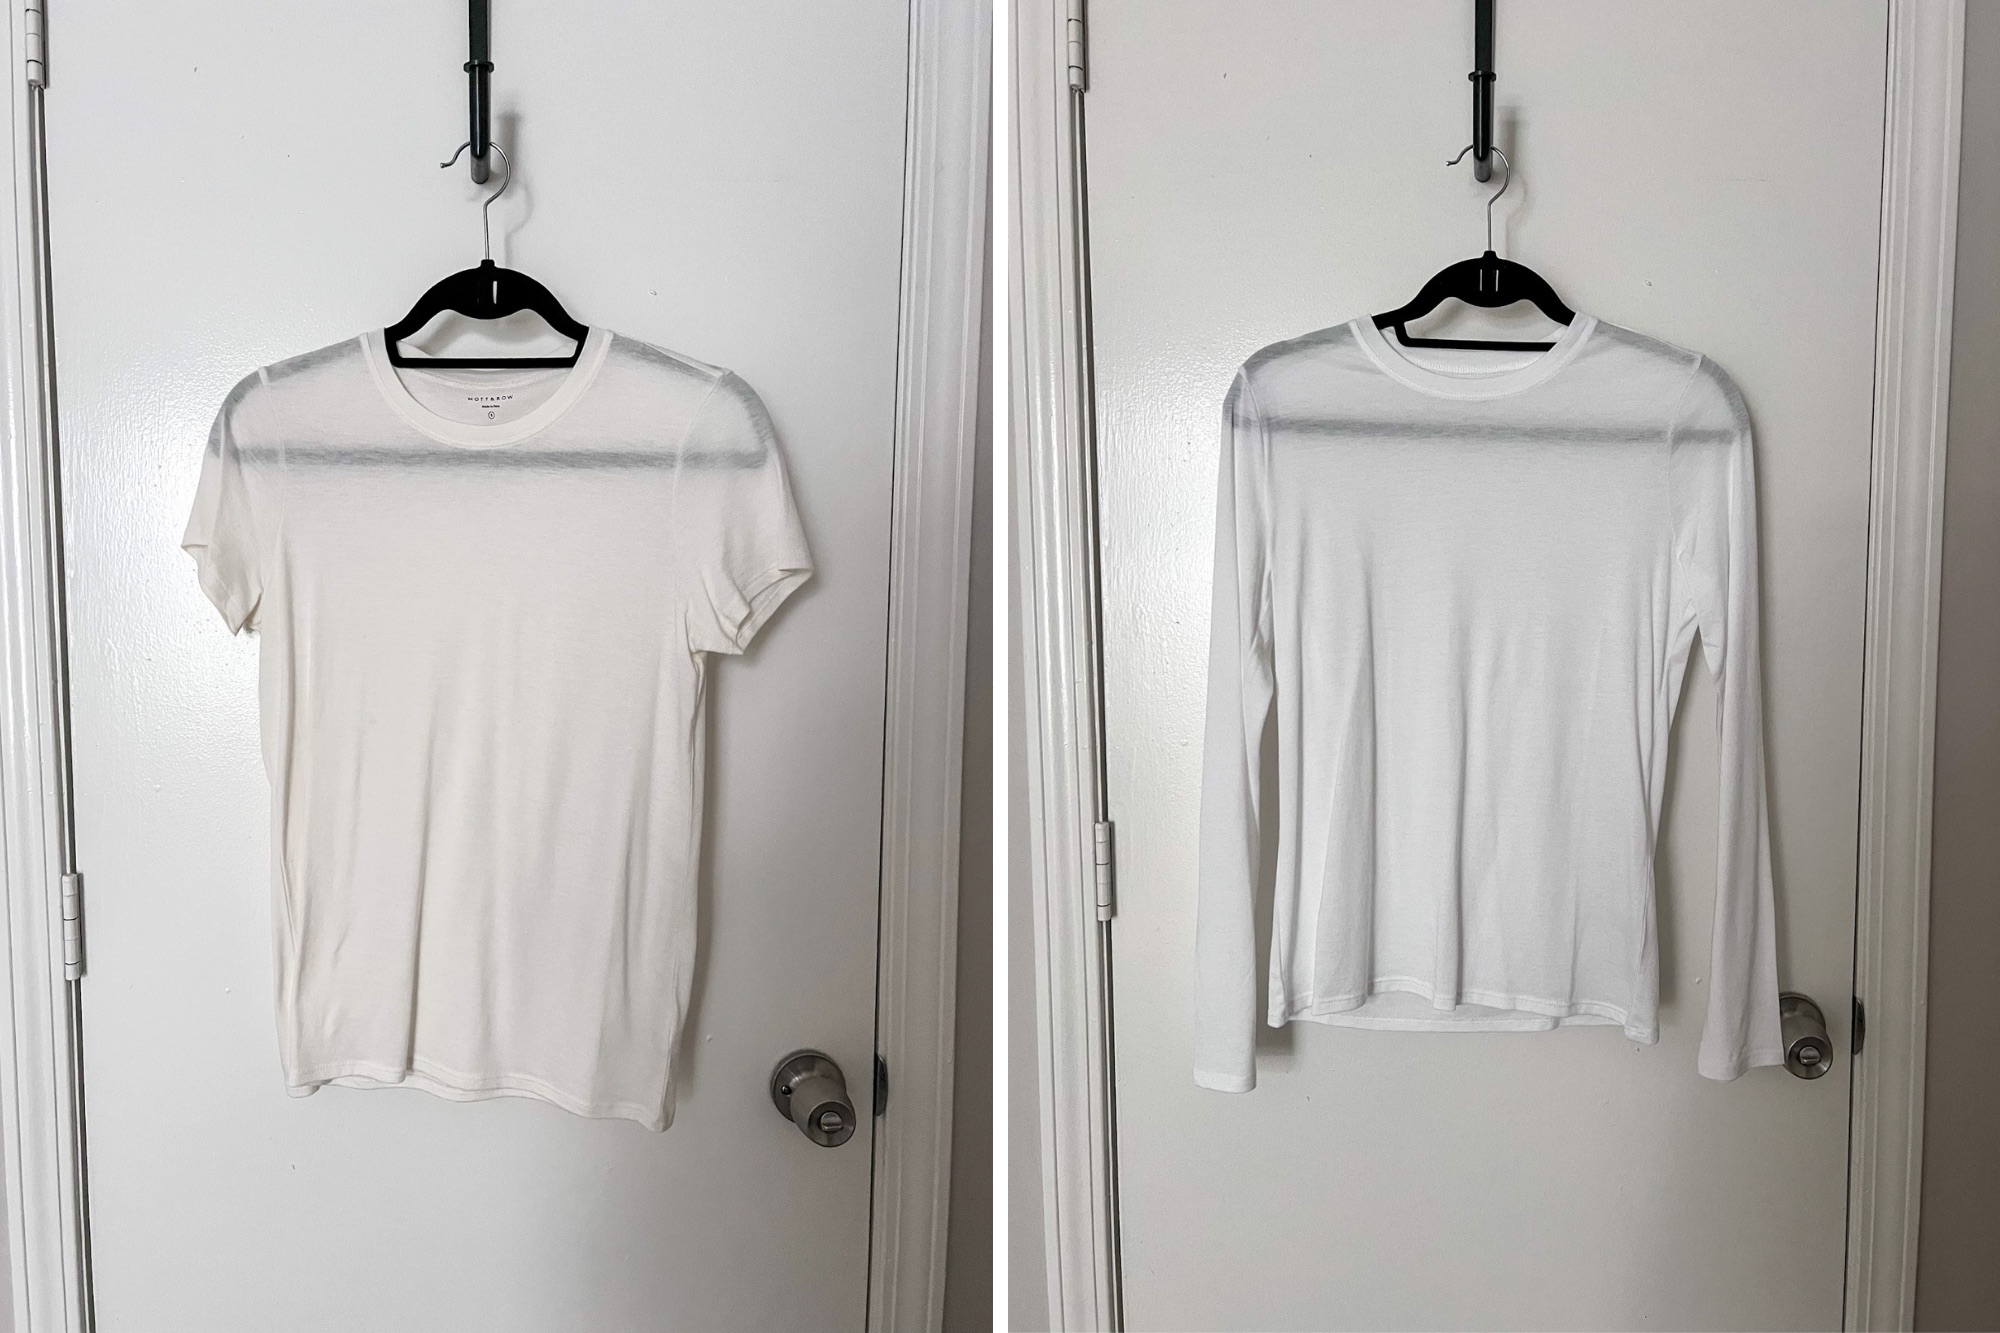 Two white t-shirts from Mott & Bow